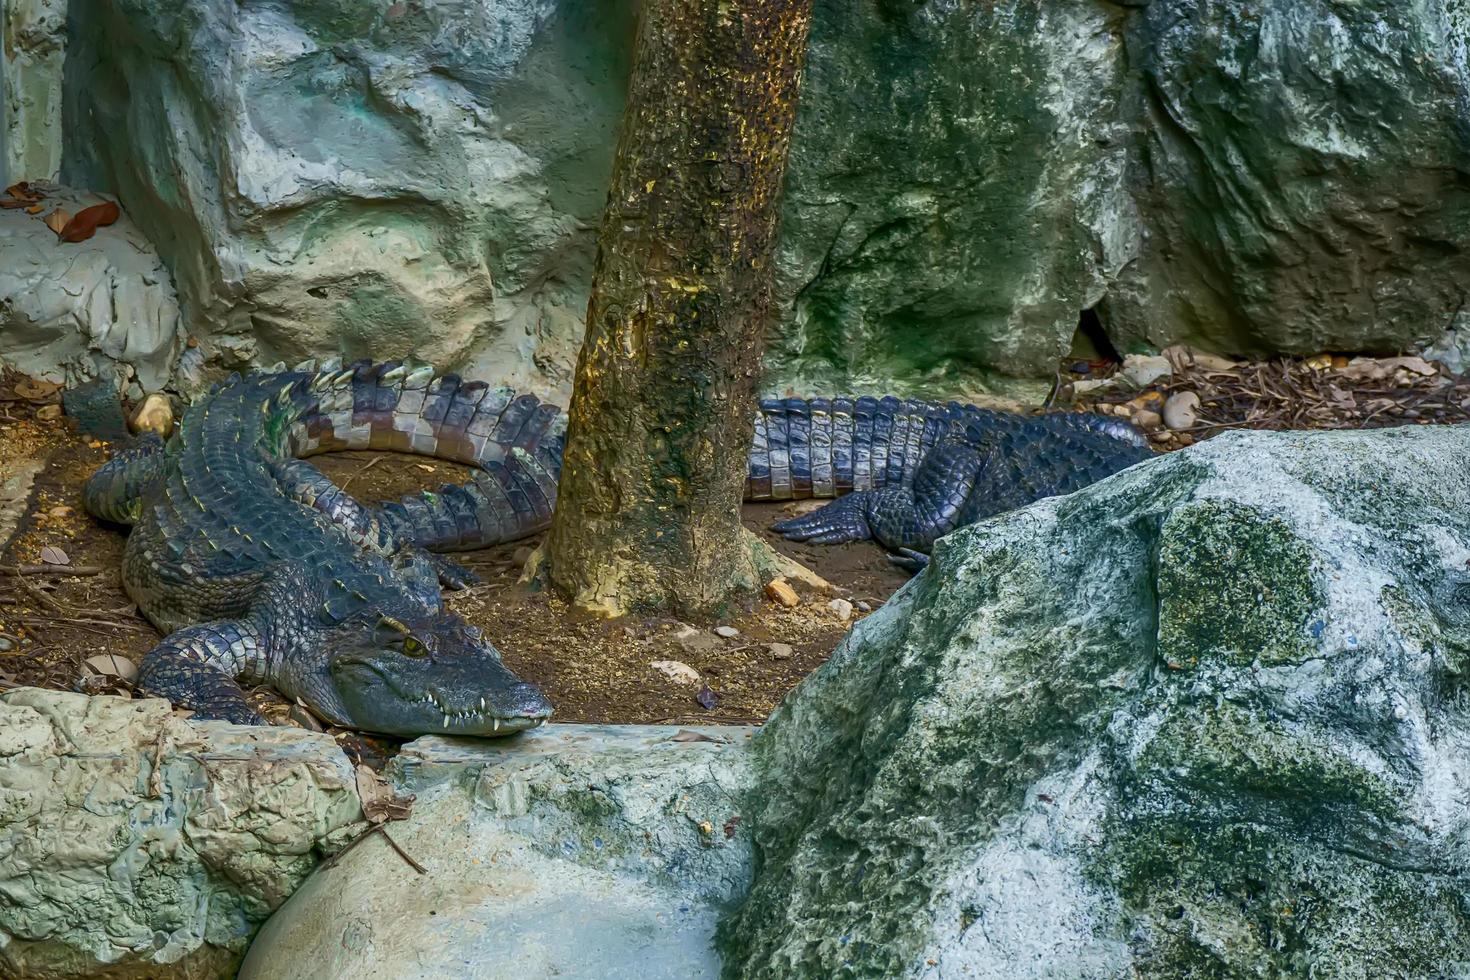 The siamese crocodile in a pond in a forest model. photo